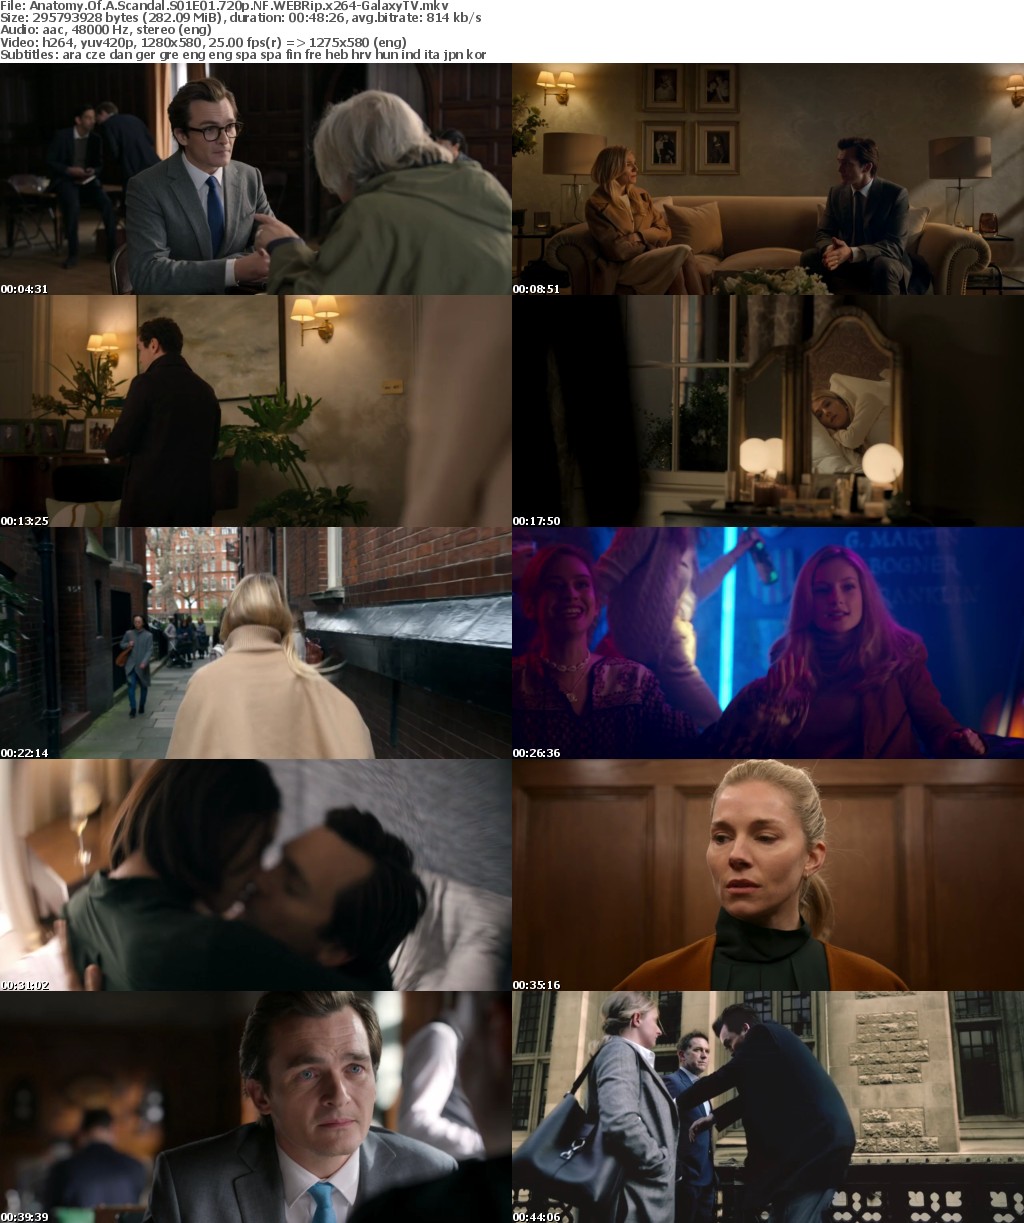 Anatomy Of A Scandal S01 COMPLETE 720p NF WEBRip x264-GalaxyTV